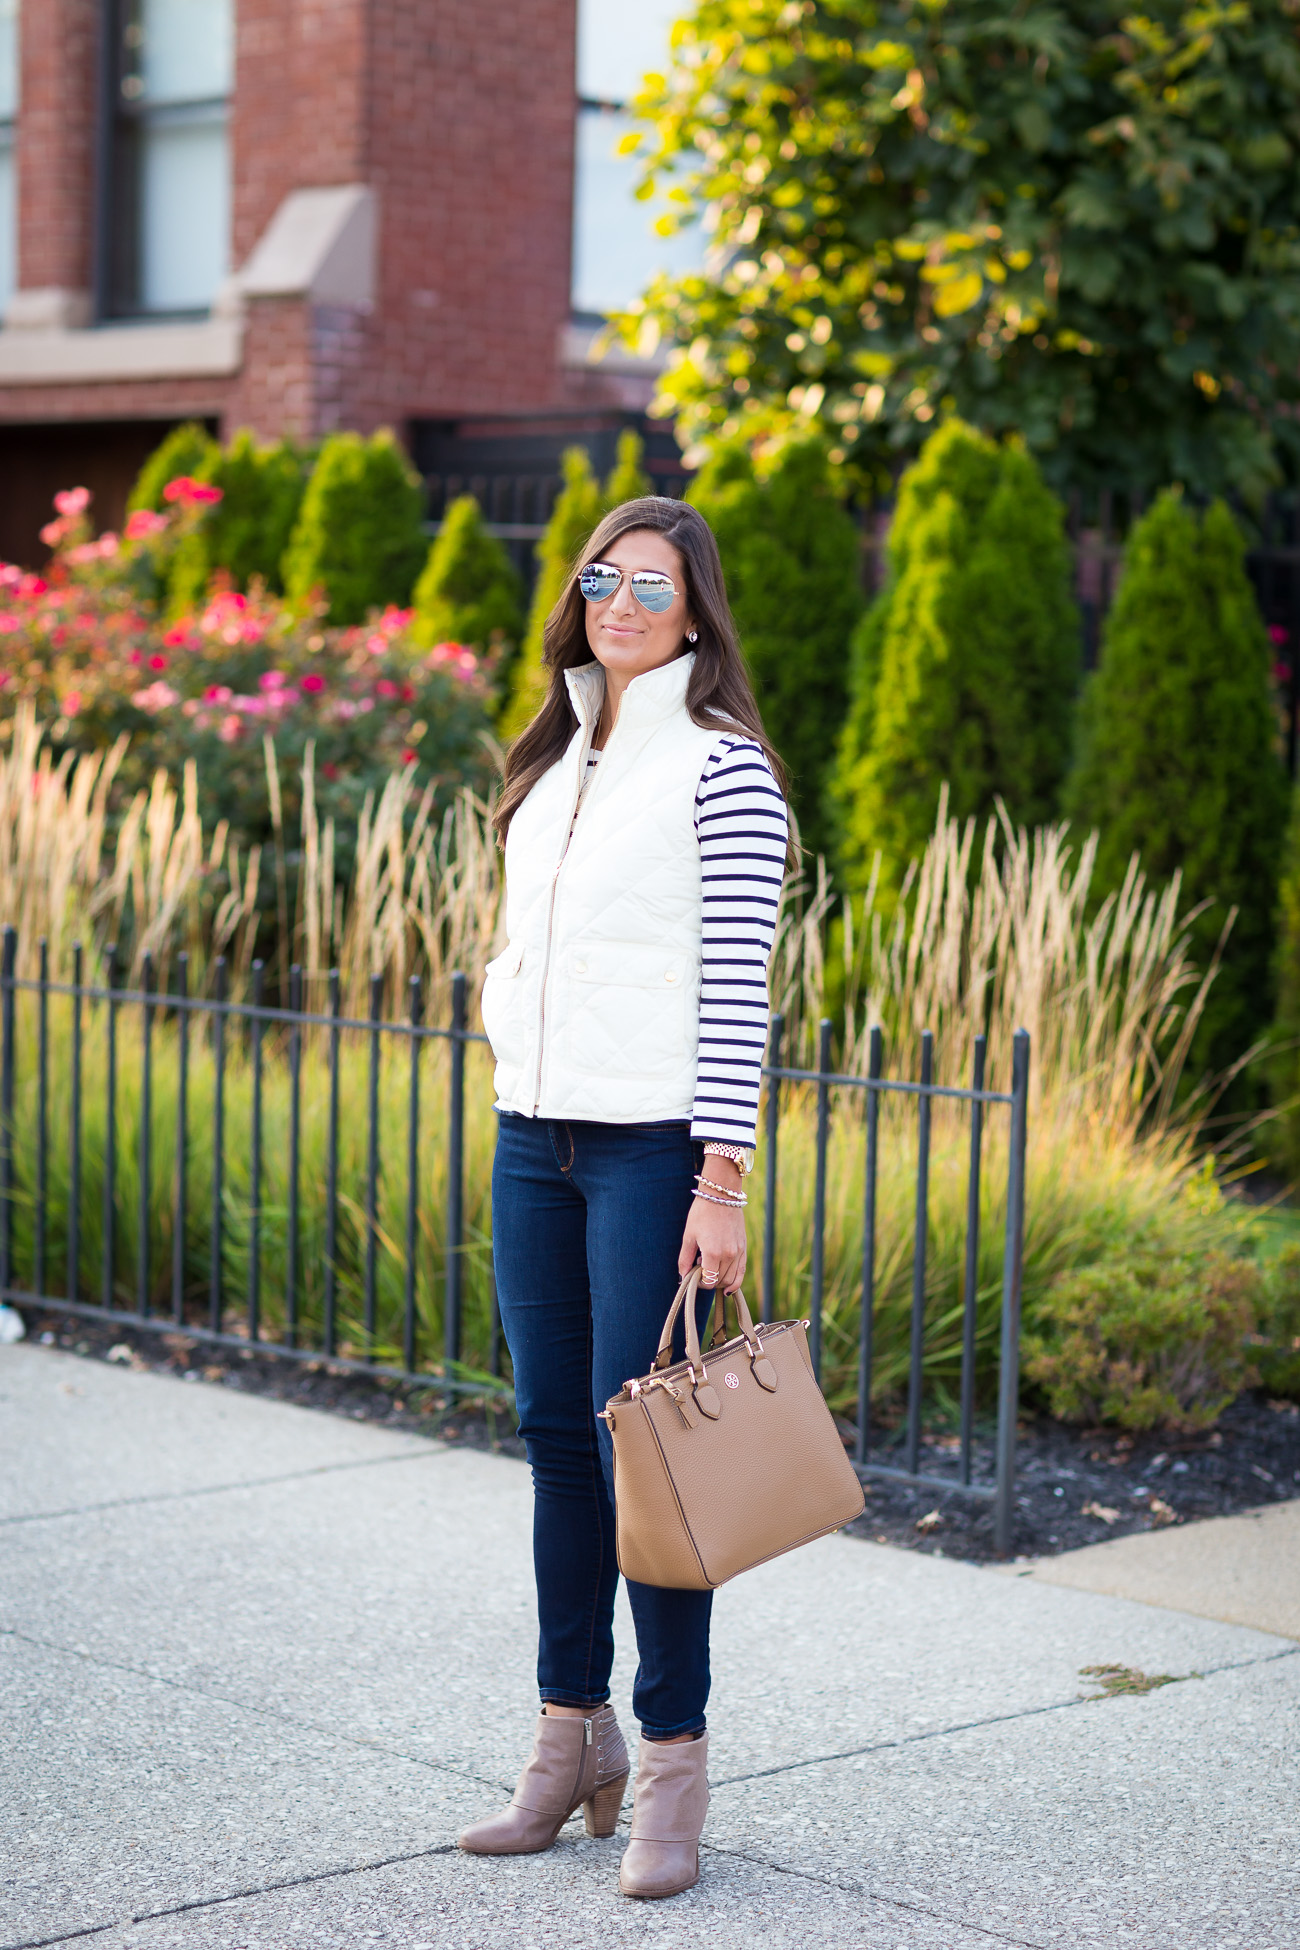 The Art of Dressing Preppy - The Style Contour